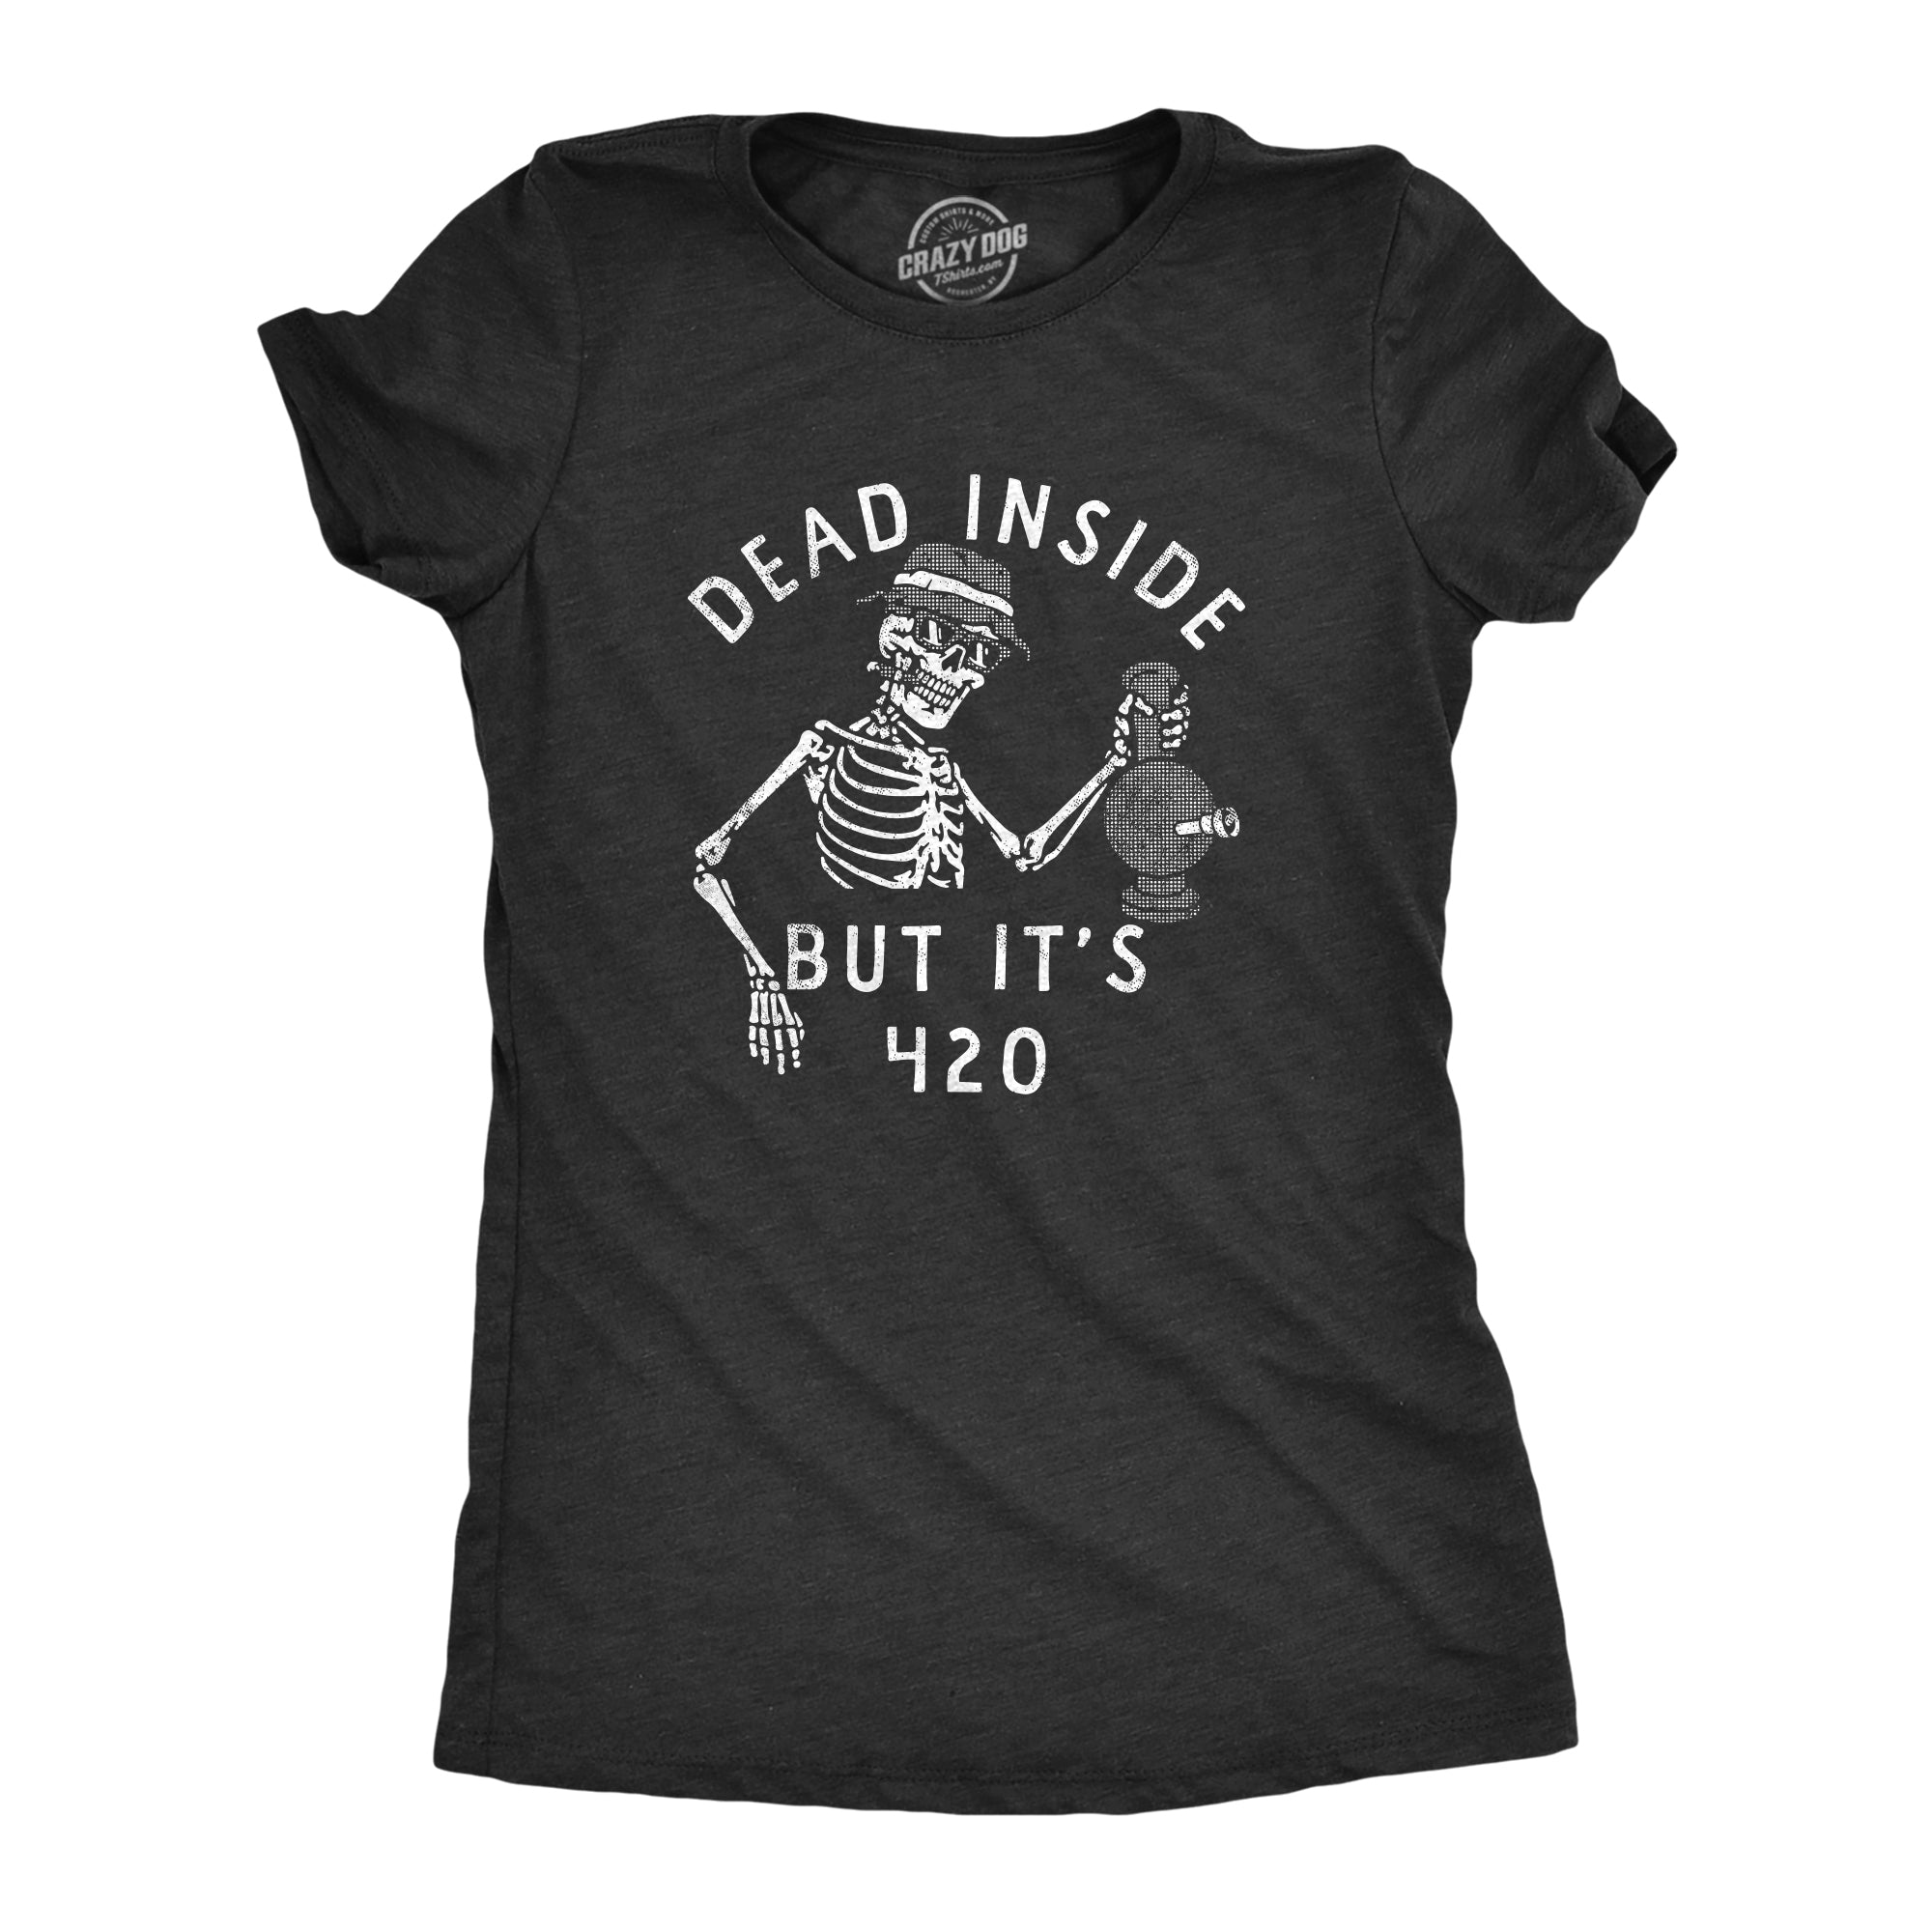 Funny Heather Black - 420 Dead Inside But Its 420 Womens T Shirt Nerdy 420 Sarcastic Tee